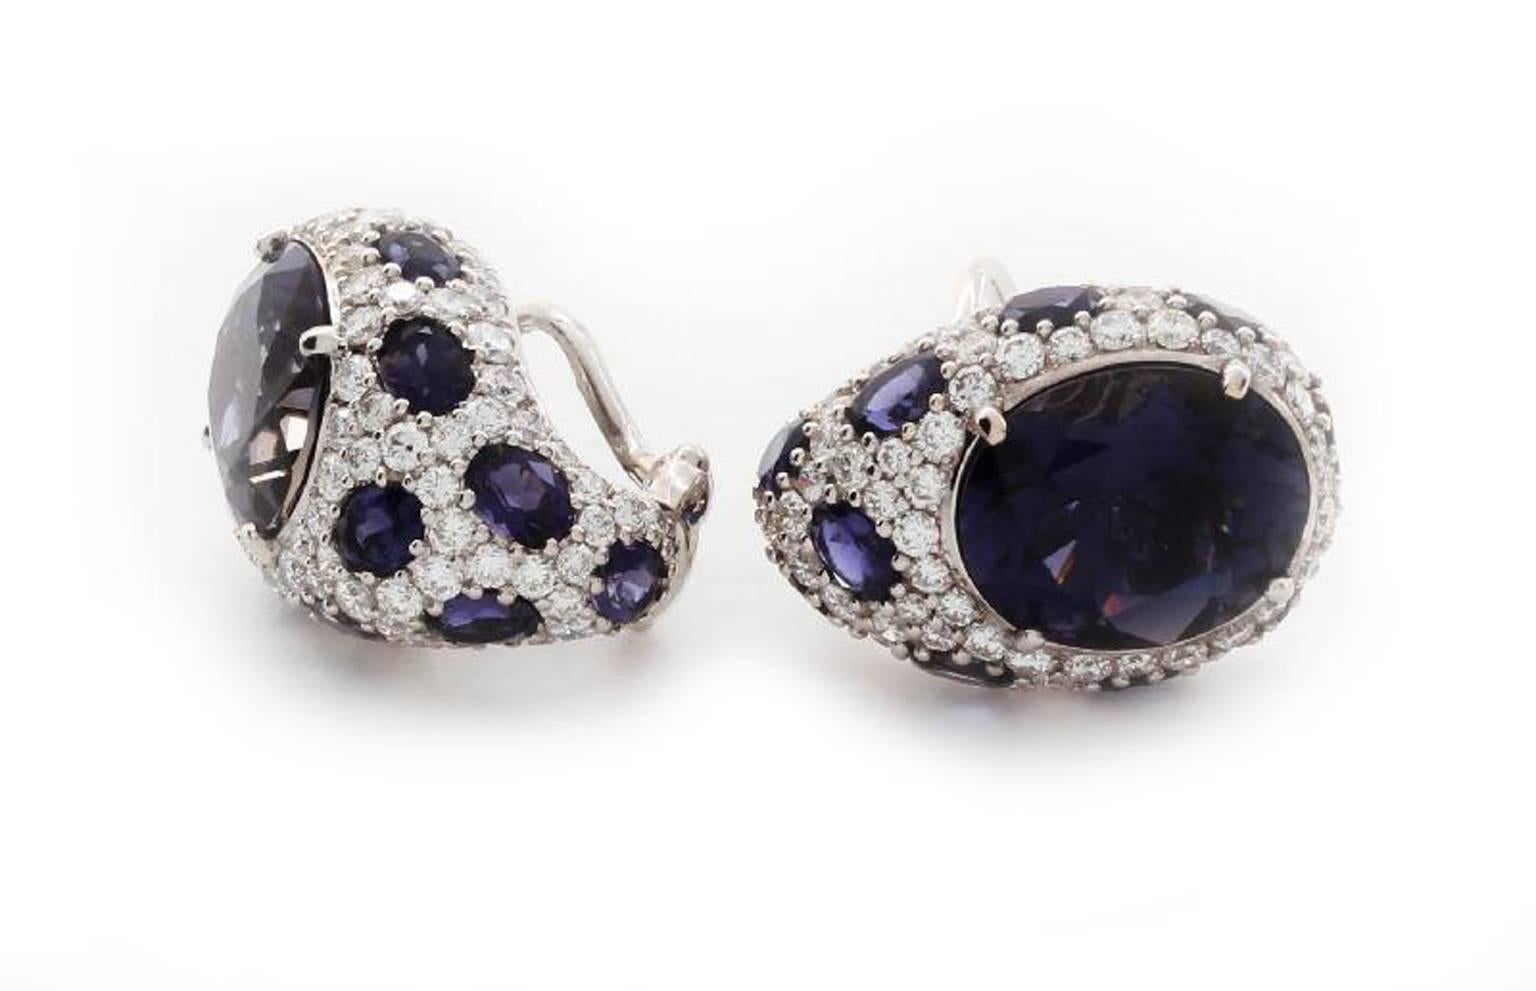 Asprey of London Iolite and Diamond Earrings in 18K White Gold. Earrings have collapsible posts, they can be worn either using posts or as clips. Total Iolite Weight: 10.95ct, Total Diamond Weight: 2.75ct, Hallmarked: "Asprey",